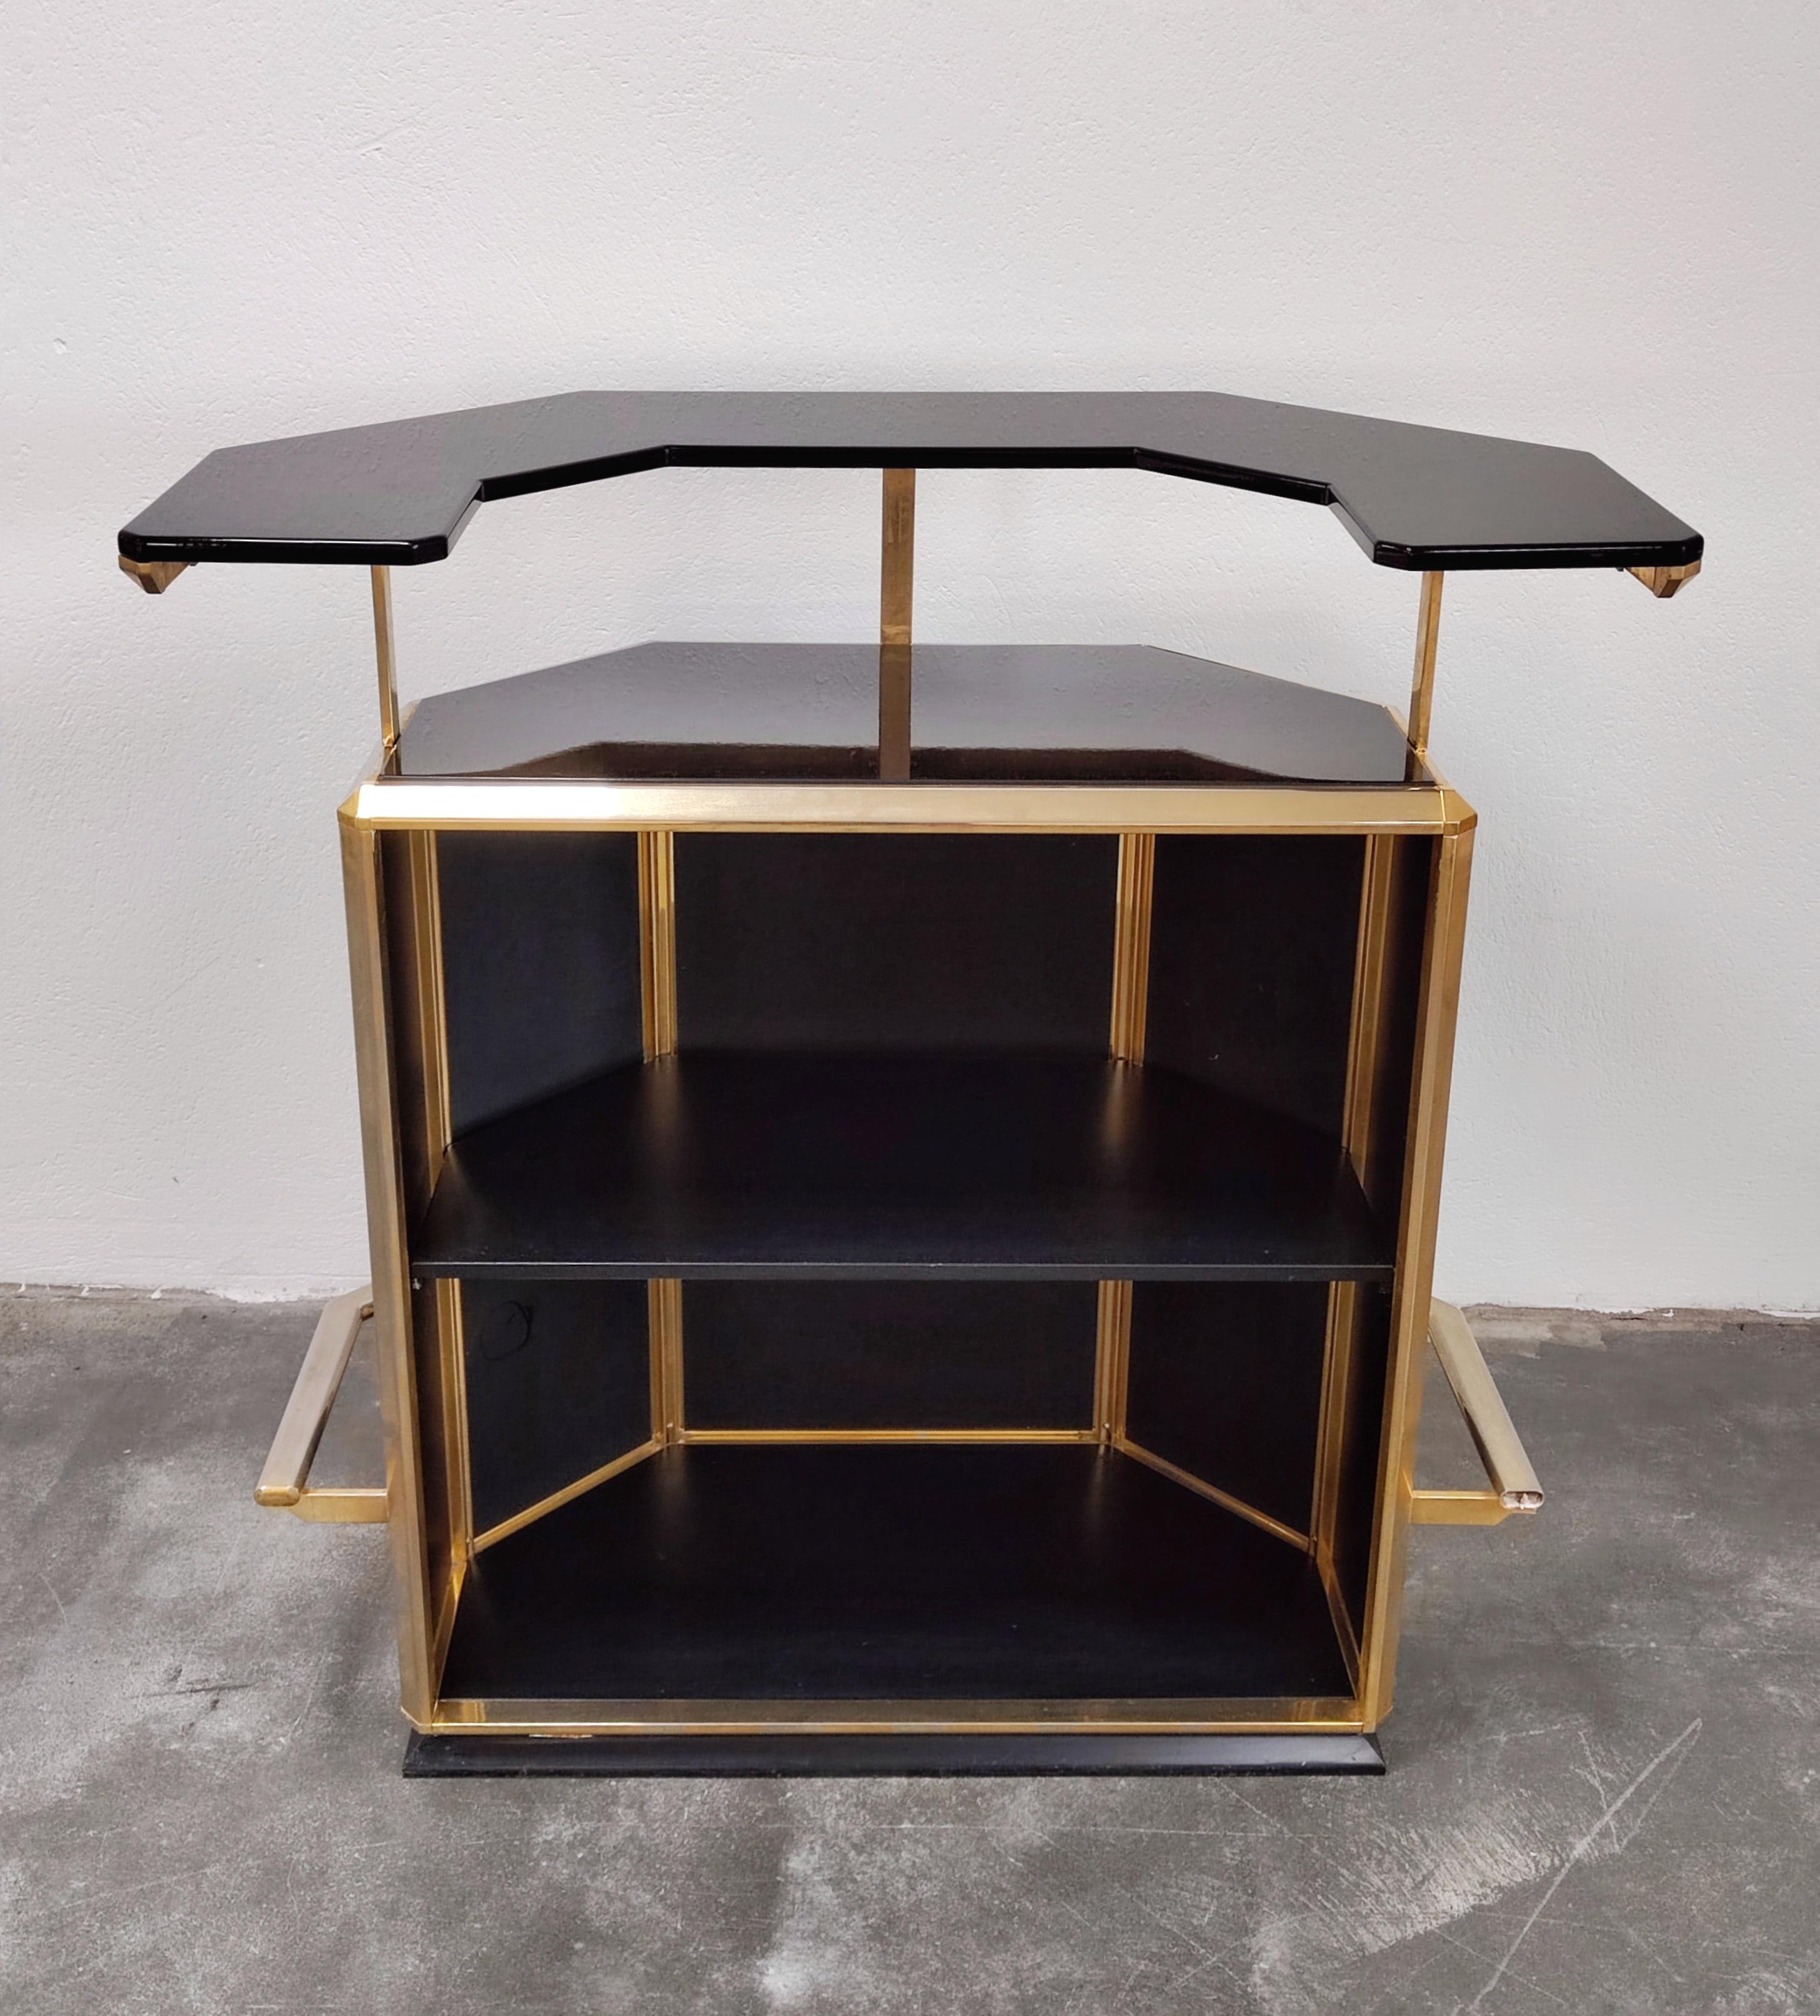 Hollywood Regency Dry Bar with Two Stools and Mirrored Shelf, Italy, 1980s For Sale 2